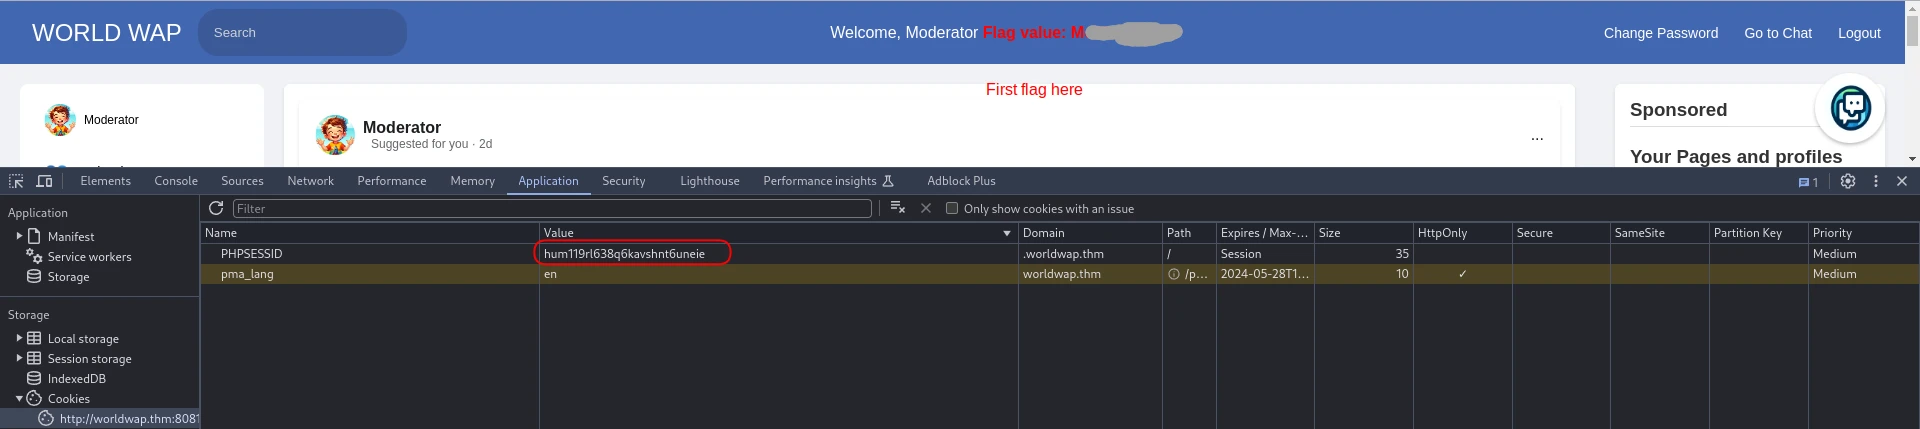 moderator's login.worldwap.thm/profile.php page, there is the first flag 